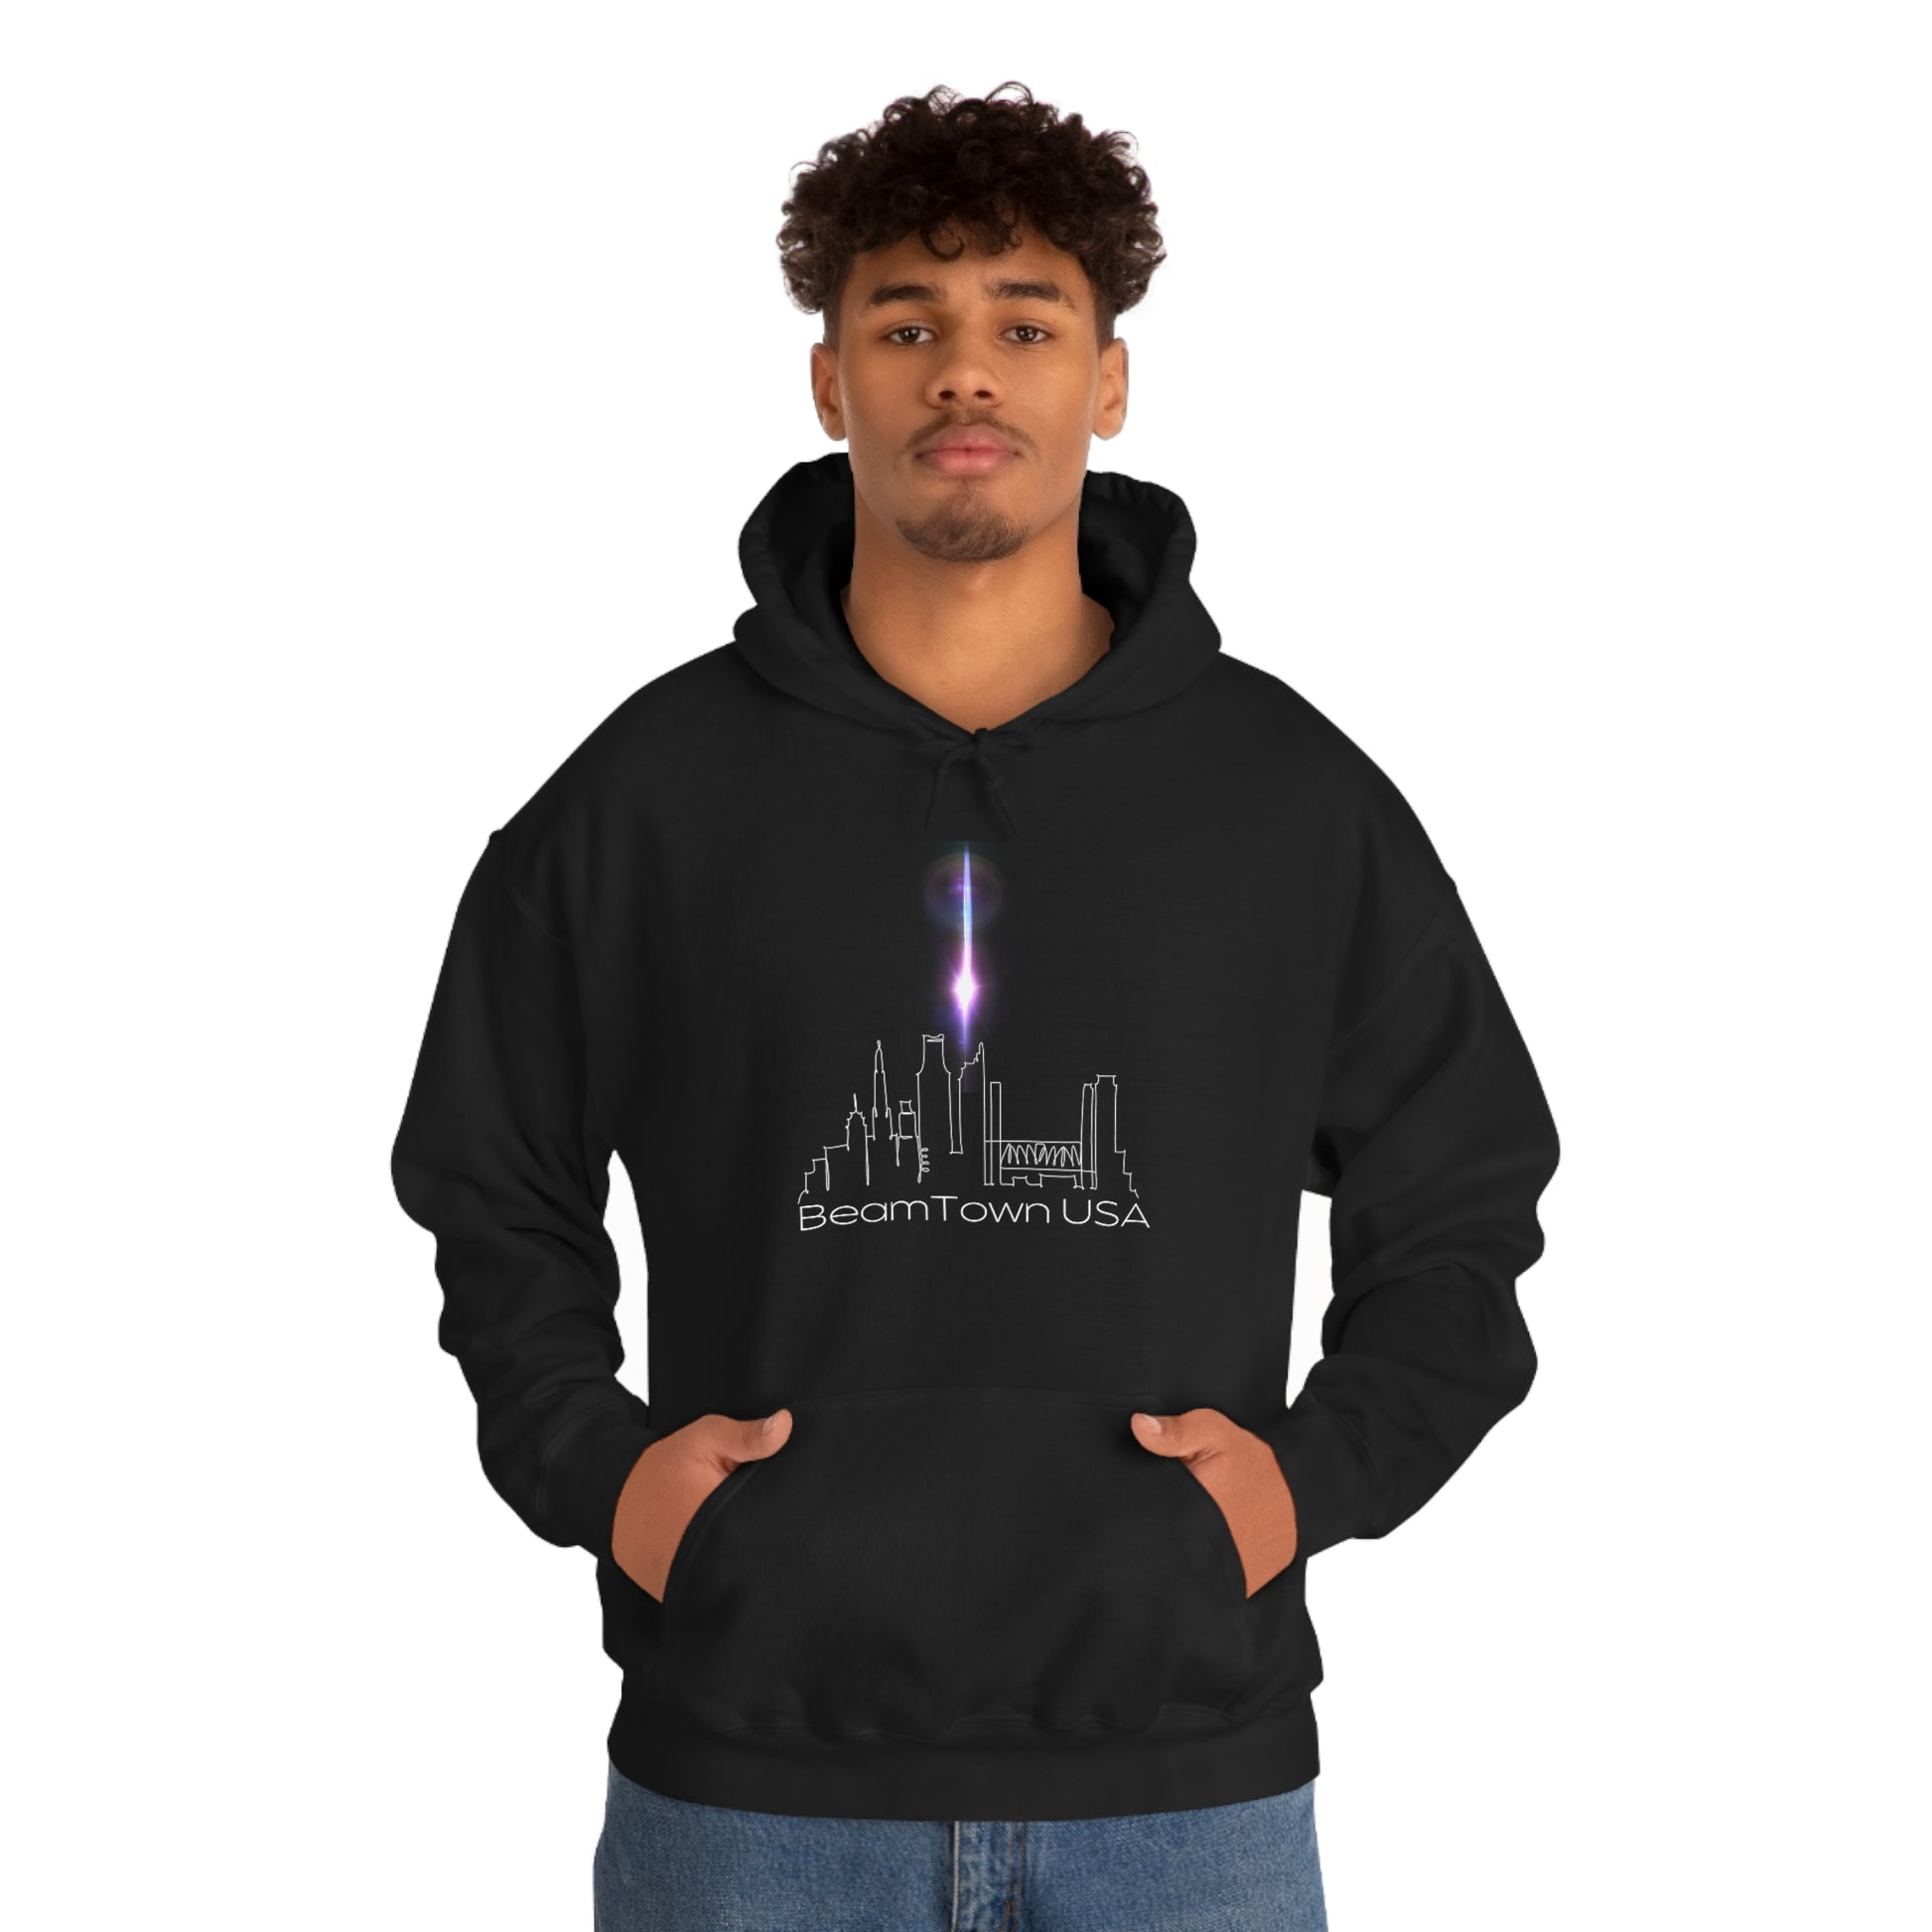 Beam Town USA, Sacramento Basketball, Unisex Hoodie Sweatshirt, Light the Beam, Kings Basketball, Kings Fan Gift, Sacramento Basketball Gift,Light the Beam, BeamTown! Celebrate another Sacramento W - WIN - for your Kings Basketball team in this comfortable, cool hoodie. Perfect to keep you warm at the game or the day after another W. It's going to be an epic season for our Sacramento Basketball team - show off your Sac BeamTown pride.